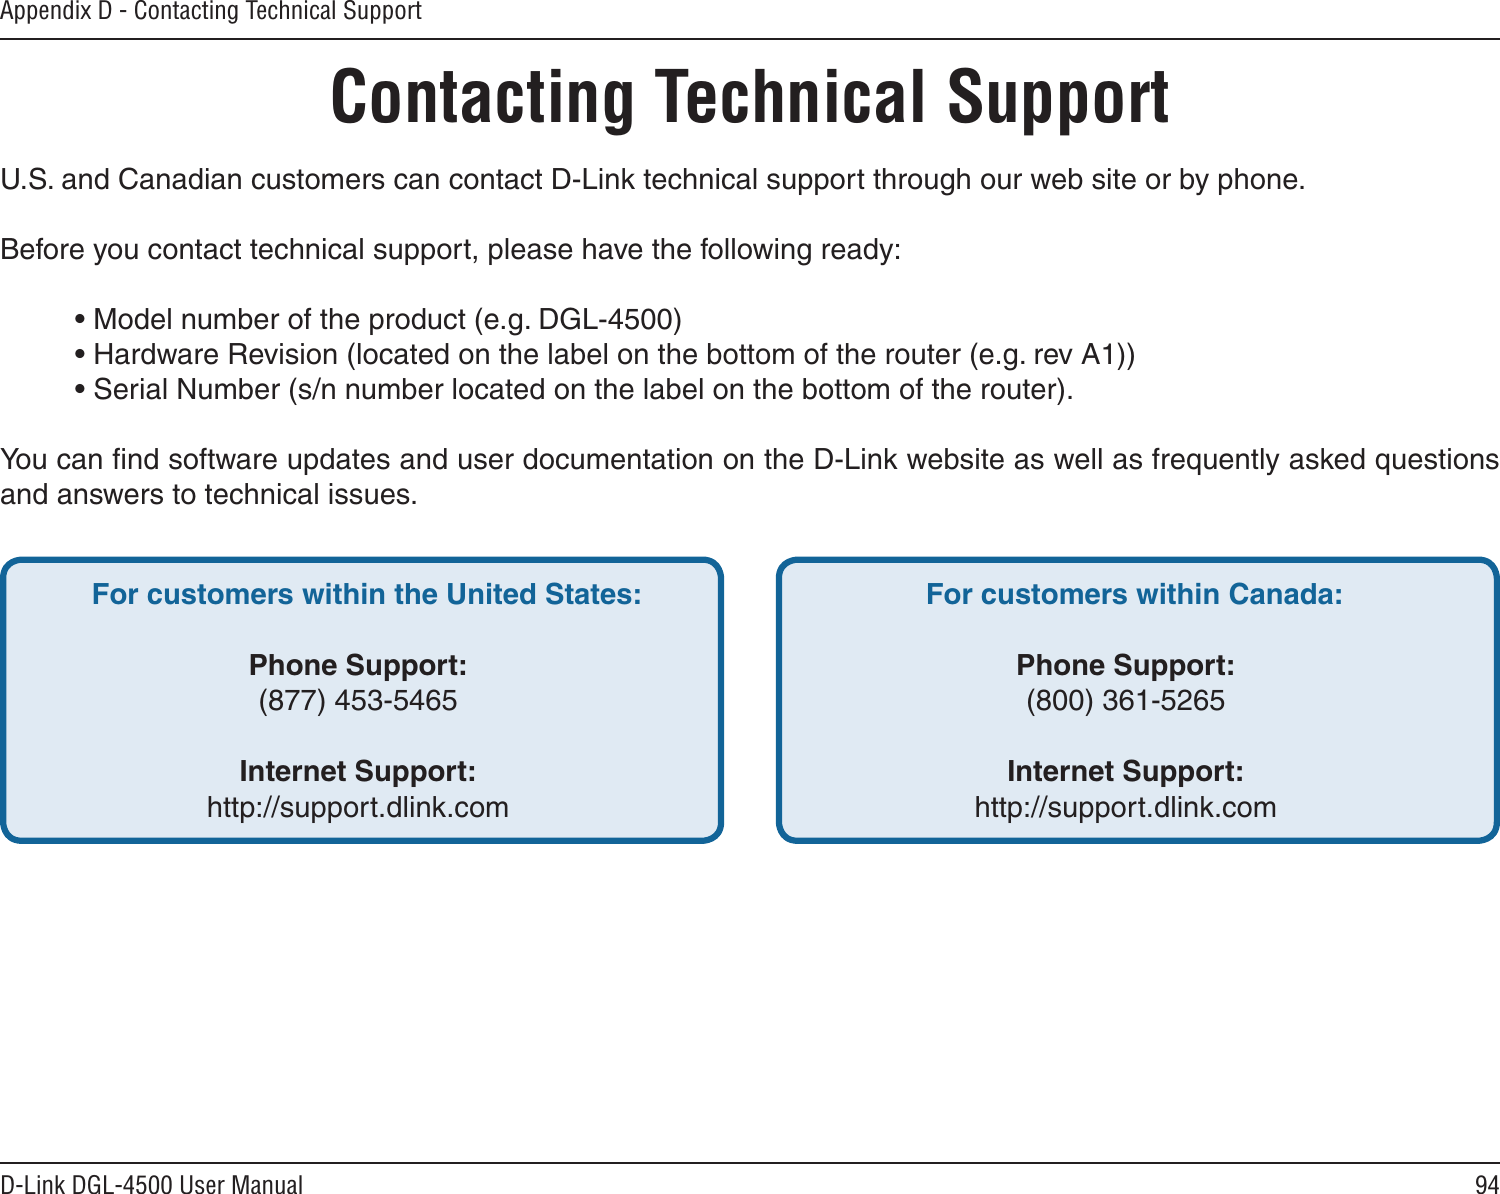 94D-Link DGL-4500 User ManualAppendix D - Contacting Technical SupportContacting Technical SupportU.S. and Canadian customers can contact D-Link technical support through our web site or by phone.Before you contact technical support, please have the following ready:  • Model number of the product (e.g. DGL-4500)  • Hardware Revision (located on the label on the bottom of the router (e.g. rev A1))  • Serial Number (s/n number located on the label on the bottom of the router). You can ﬁnd software updates and user documentation on the D-Link website as well as frequently asked questions and answers to technical issues.For customers within the United States: Phone Support:(877) 453-5465Internet Support:http://support.dlink.com For customers within Canada: Phone Support:(800) 361-5265 Internet Support:http://support.dlink.com 